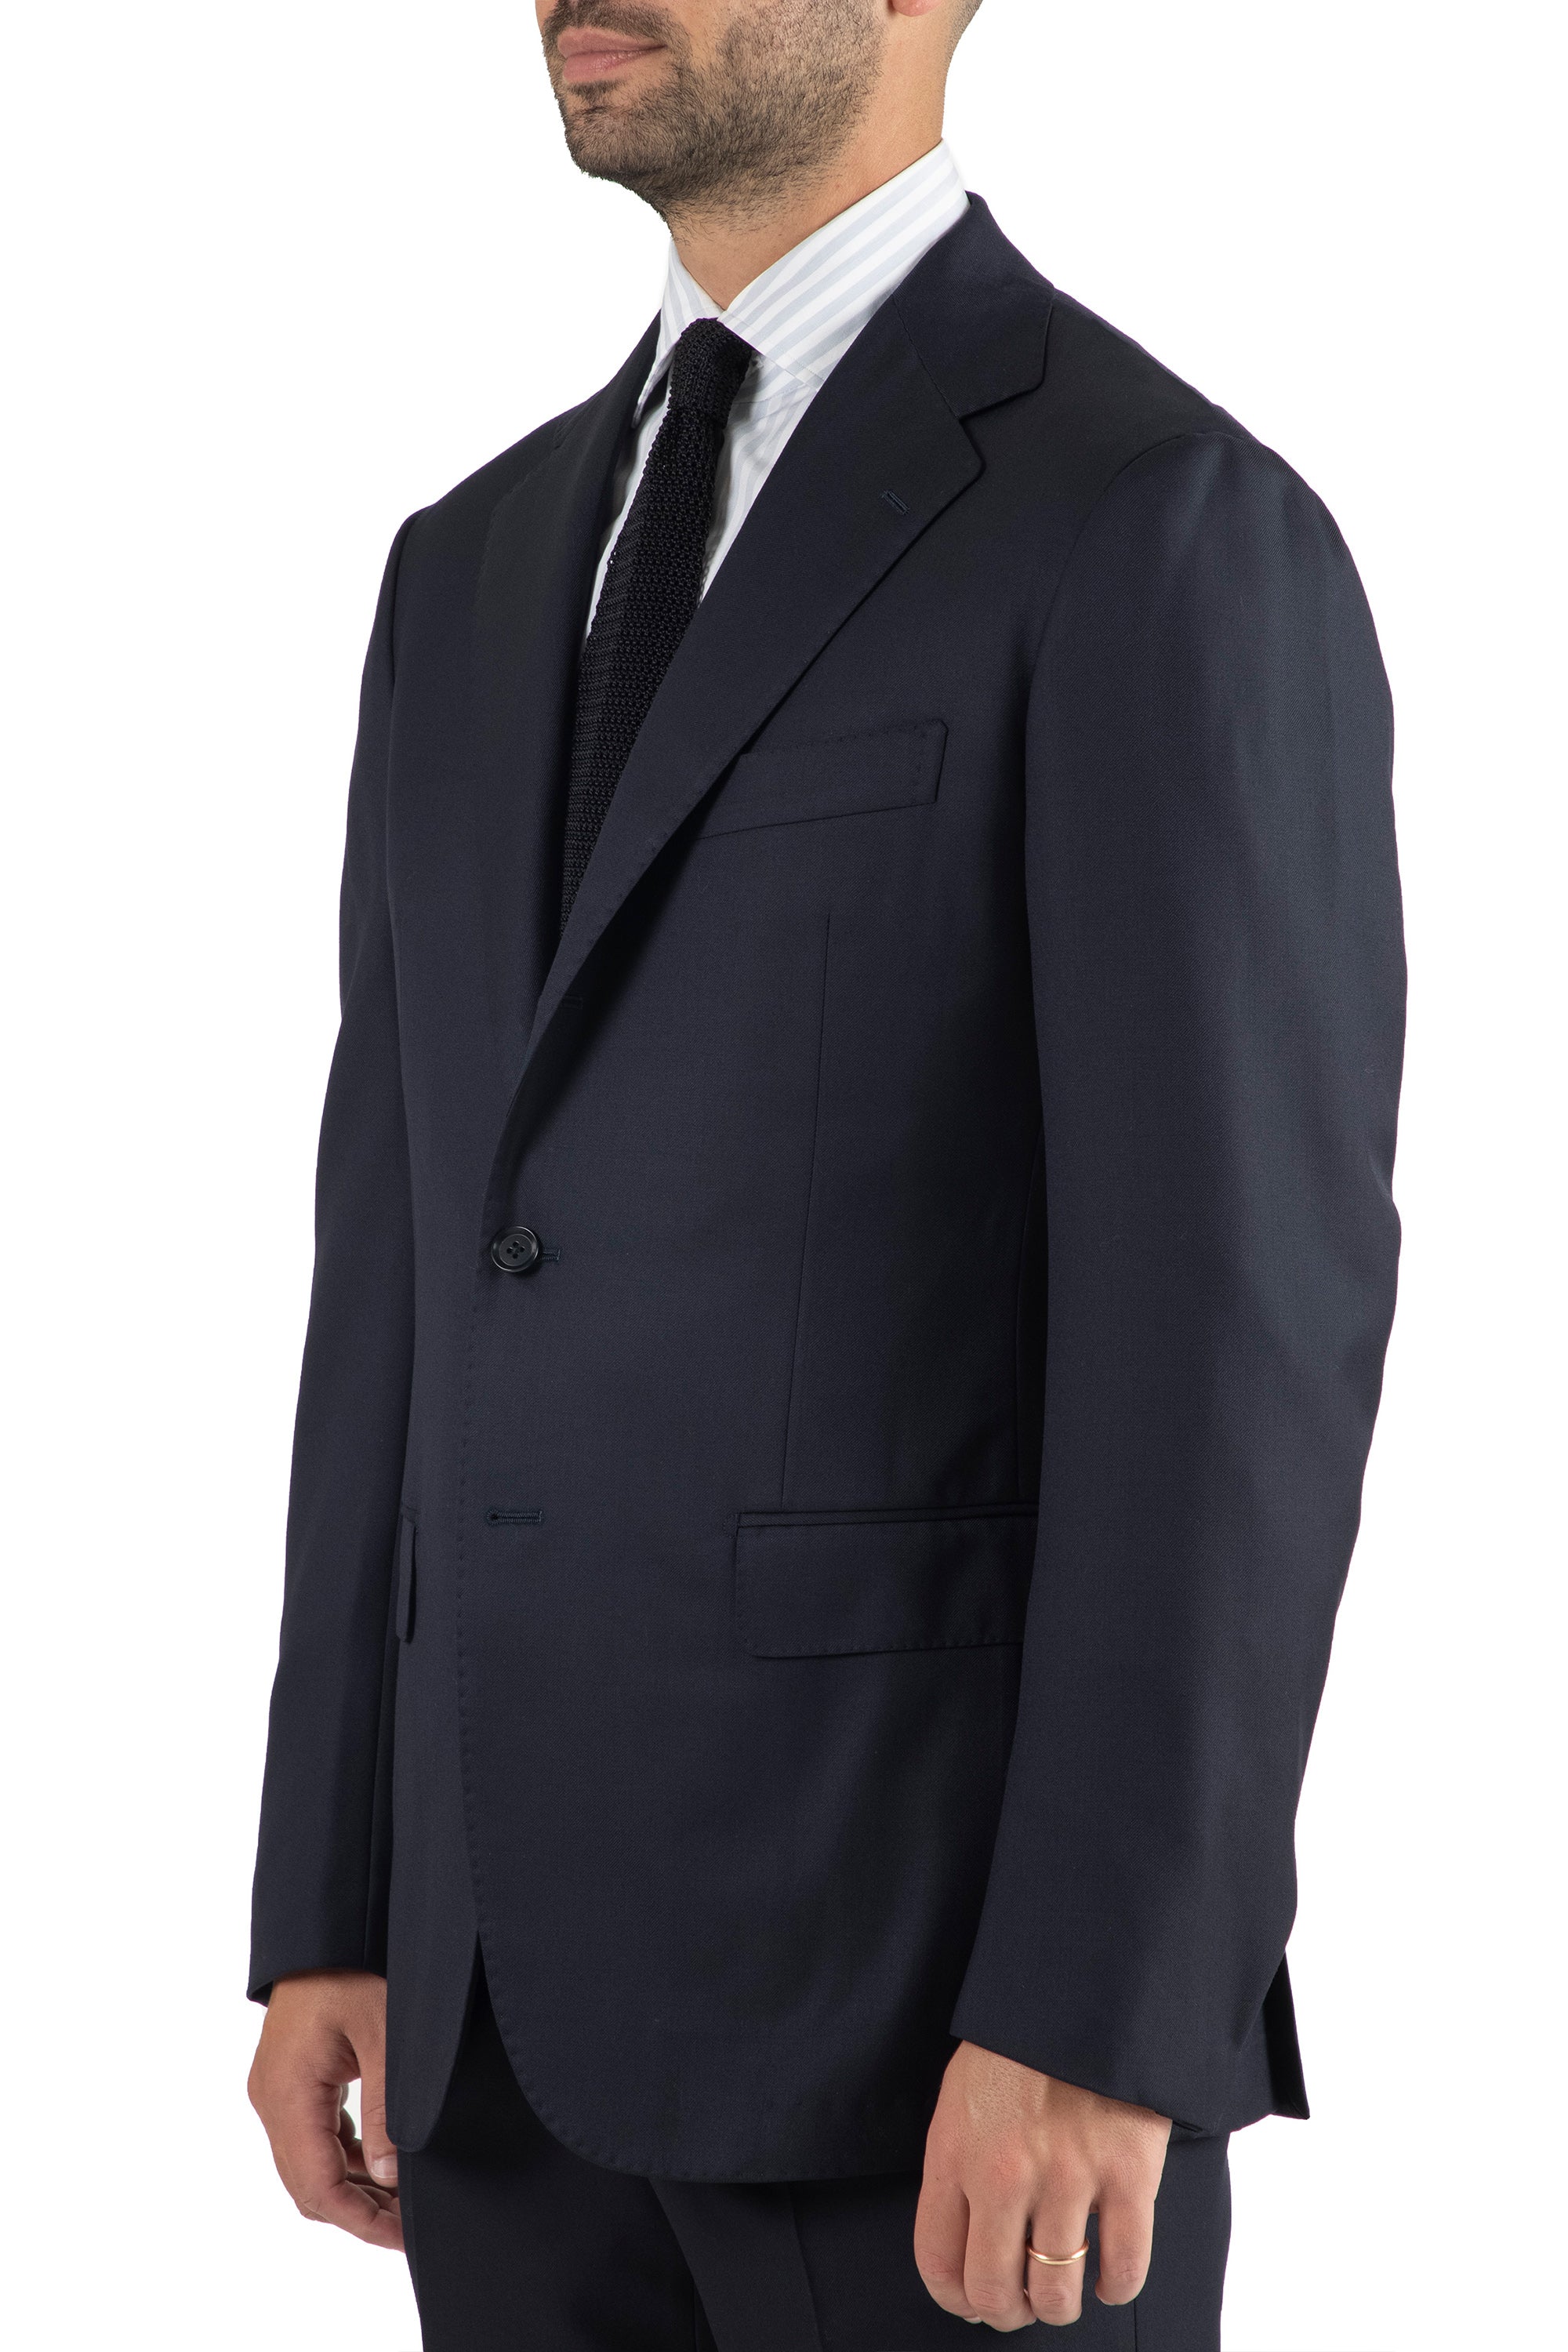 The Armoury Model 3A Navy Wool Suit